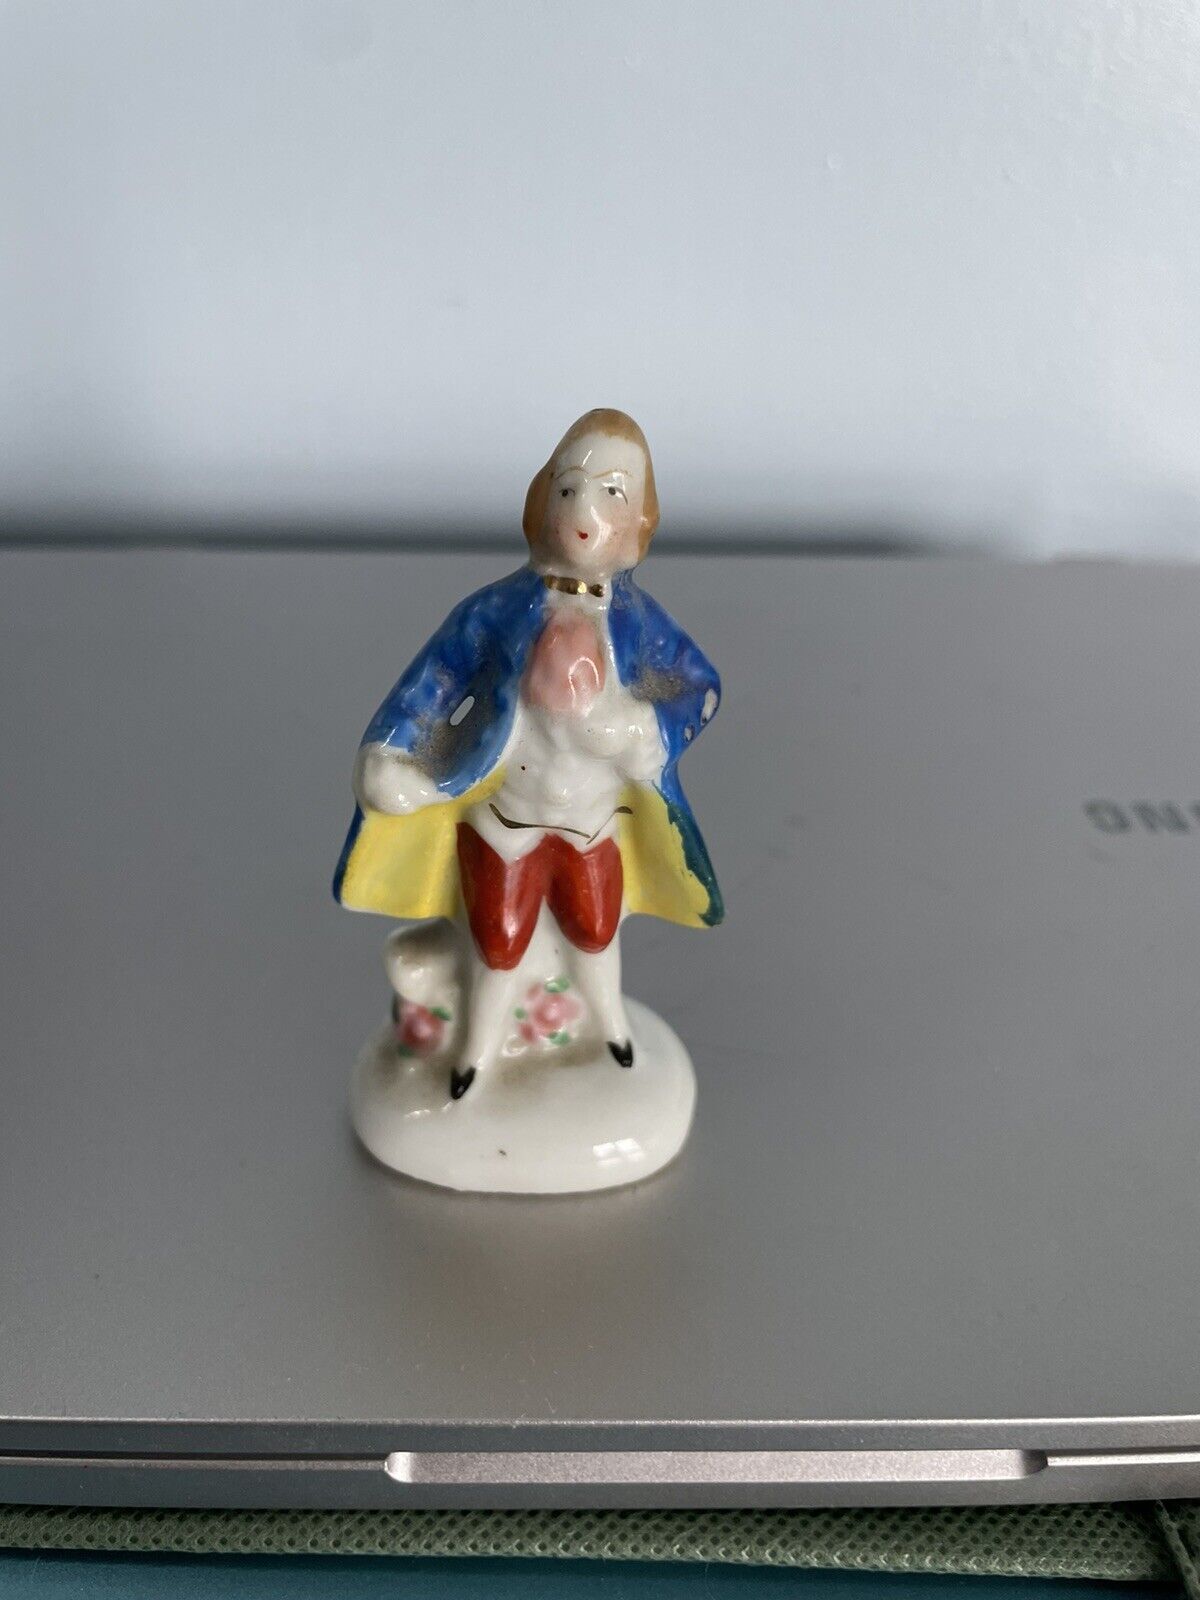 Vintage Porcelain Colonial Man Figurine  Made In Occupied Japan 1945 - 1952